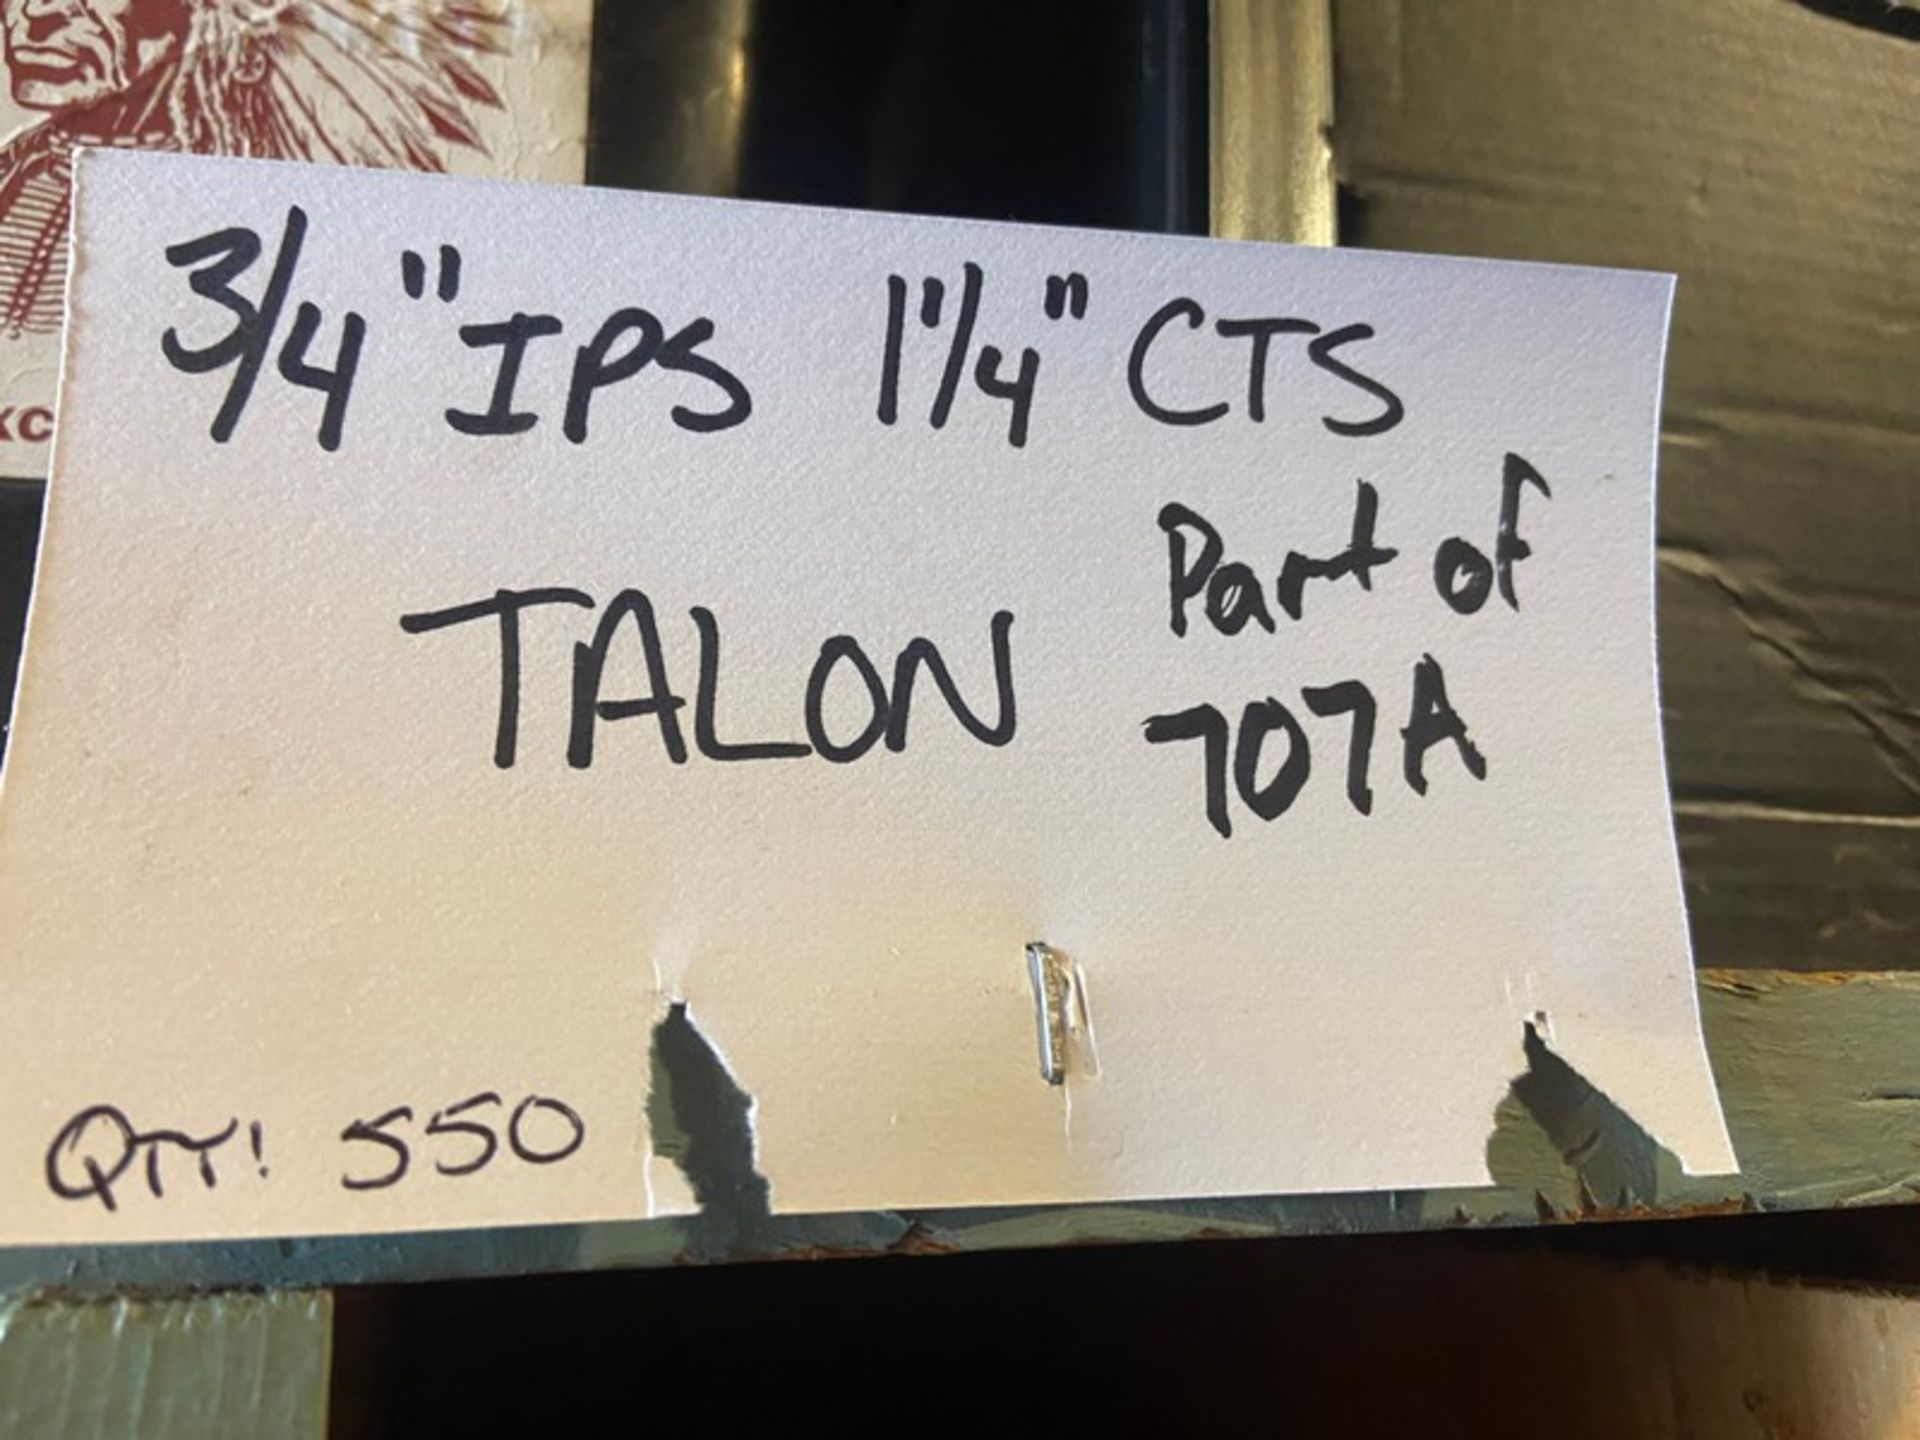 (320) 3/4" CTS Talon; (550) 3/4" IPS 1-1/4" CTS Talon (LOCATED IN MONROEVILLE, PA) - Image 2 of 5